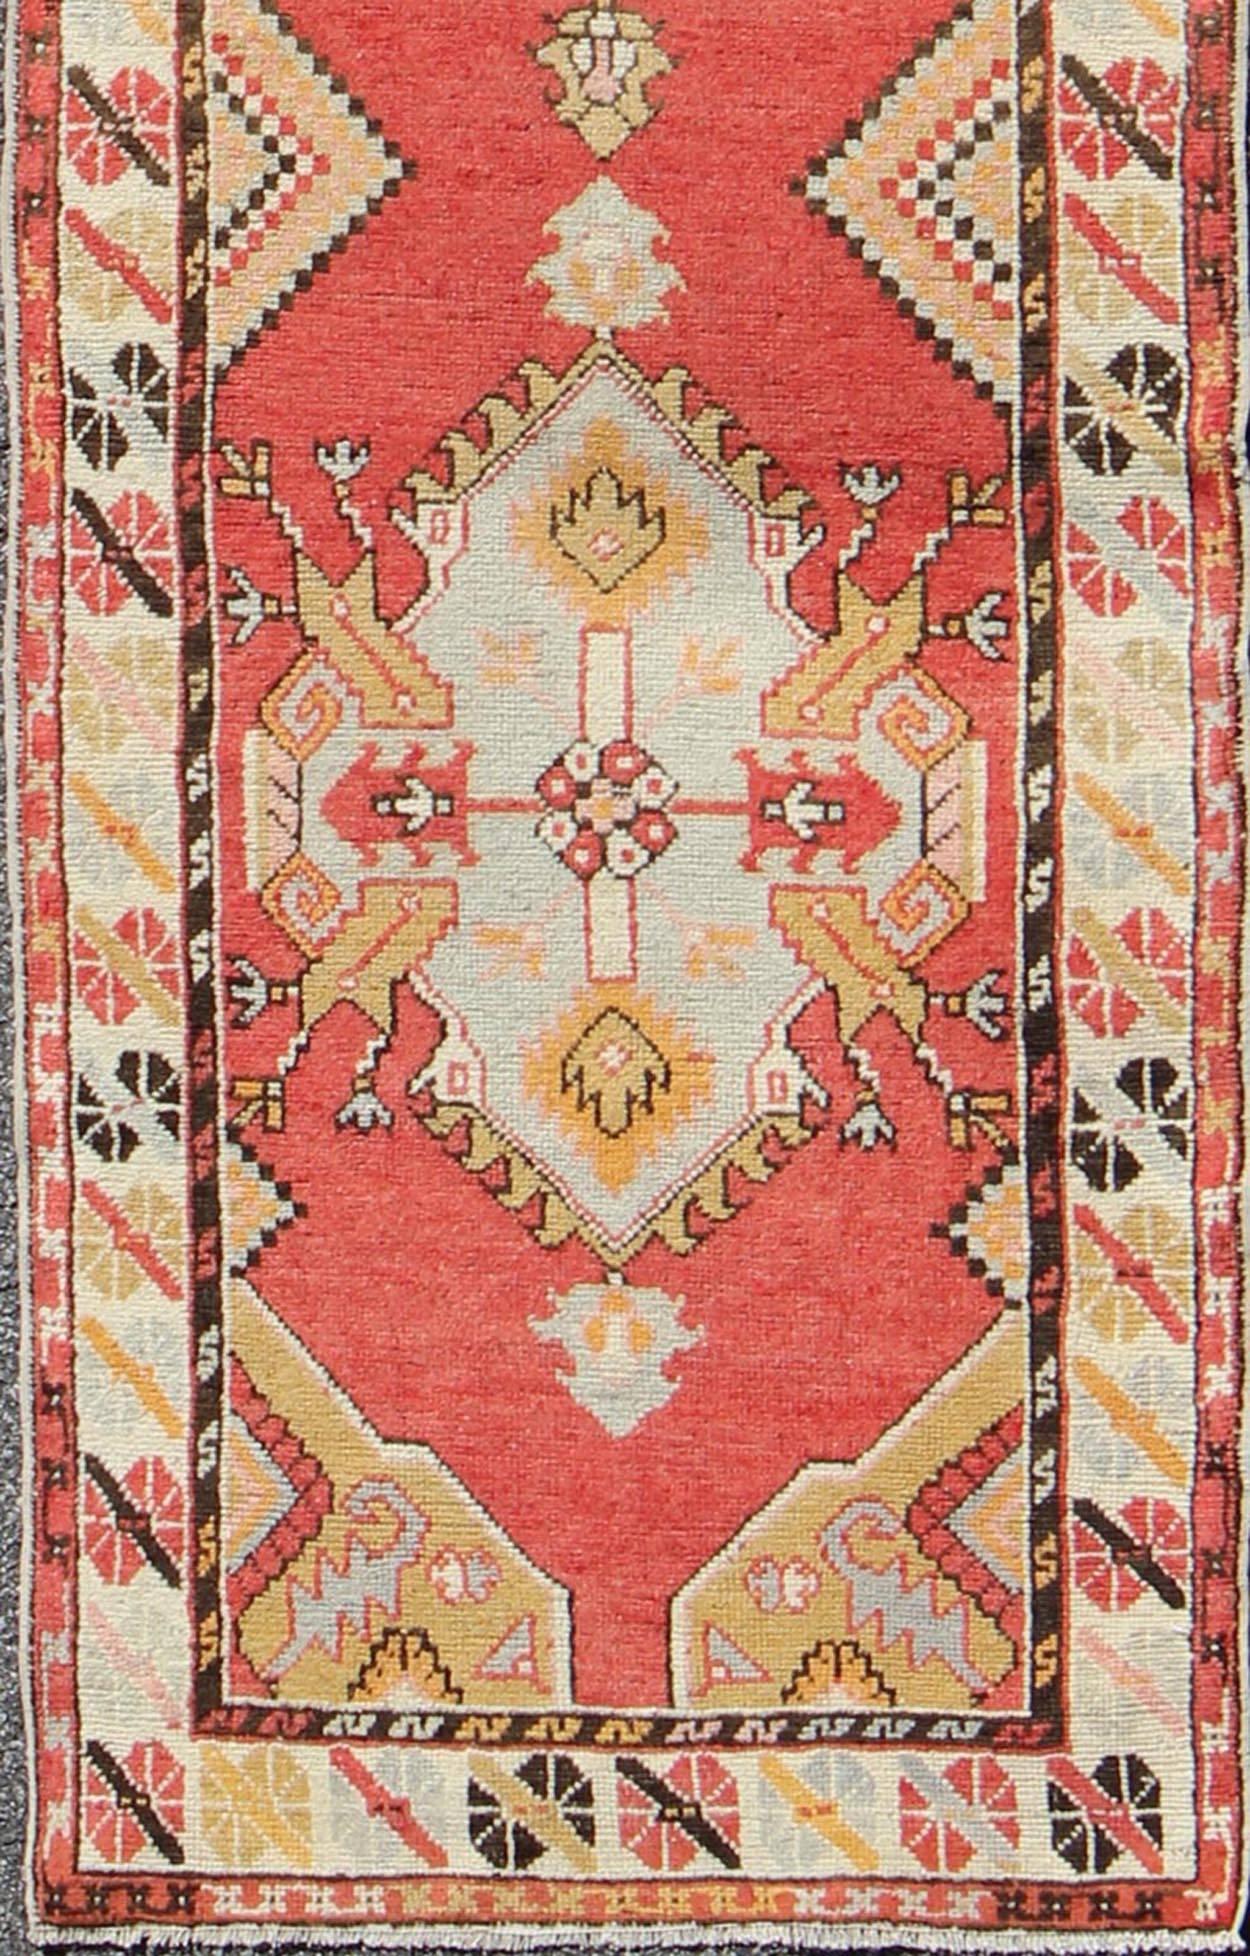 Sub-geometric tribal vintage Oushak runner from Turkey in burnt orange, rug en-154, country of origin / type: Turkey / Oushak, circa 1930

This antique Turkish Oushak gallery runner (circa 1930) features a unique blend of colors and an intricately